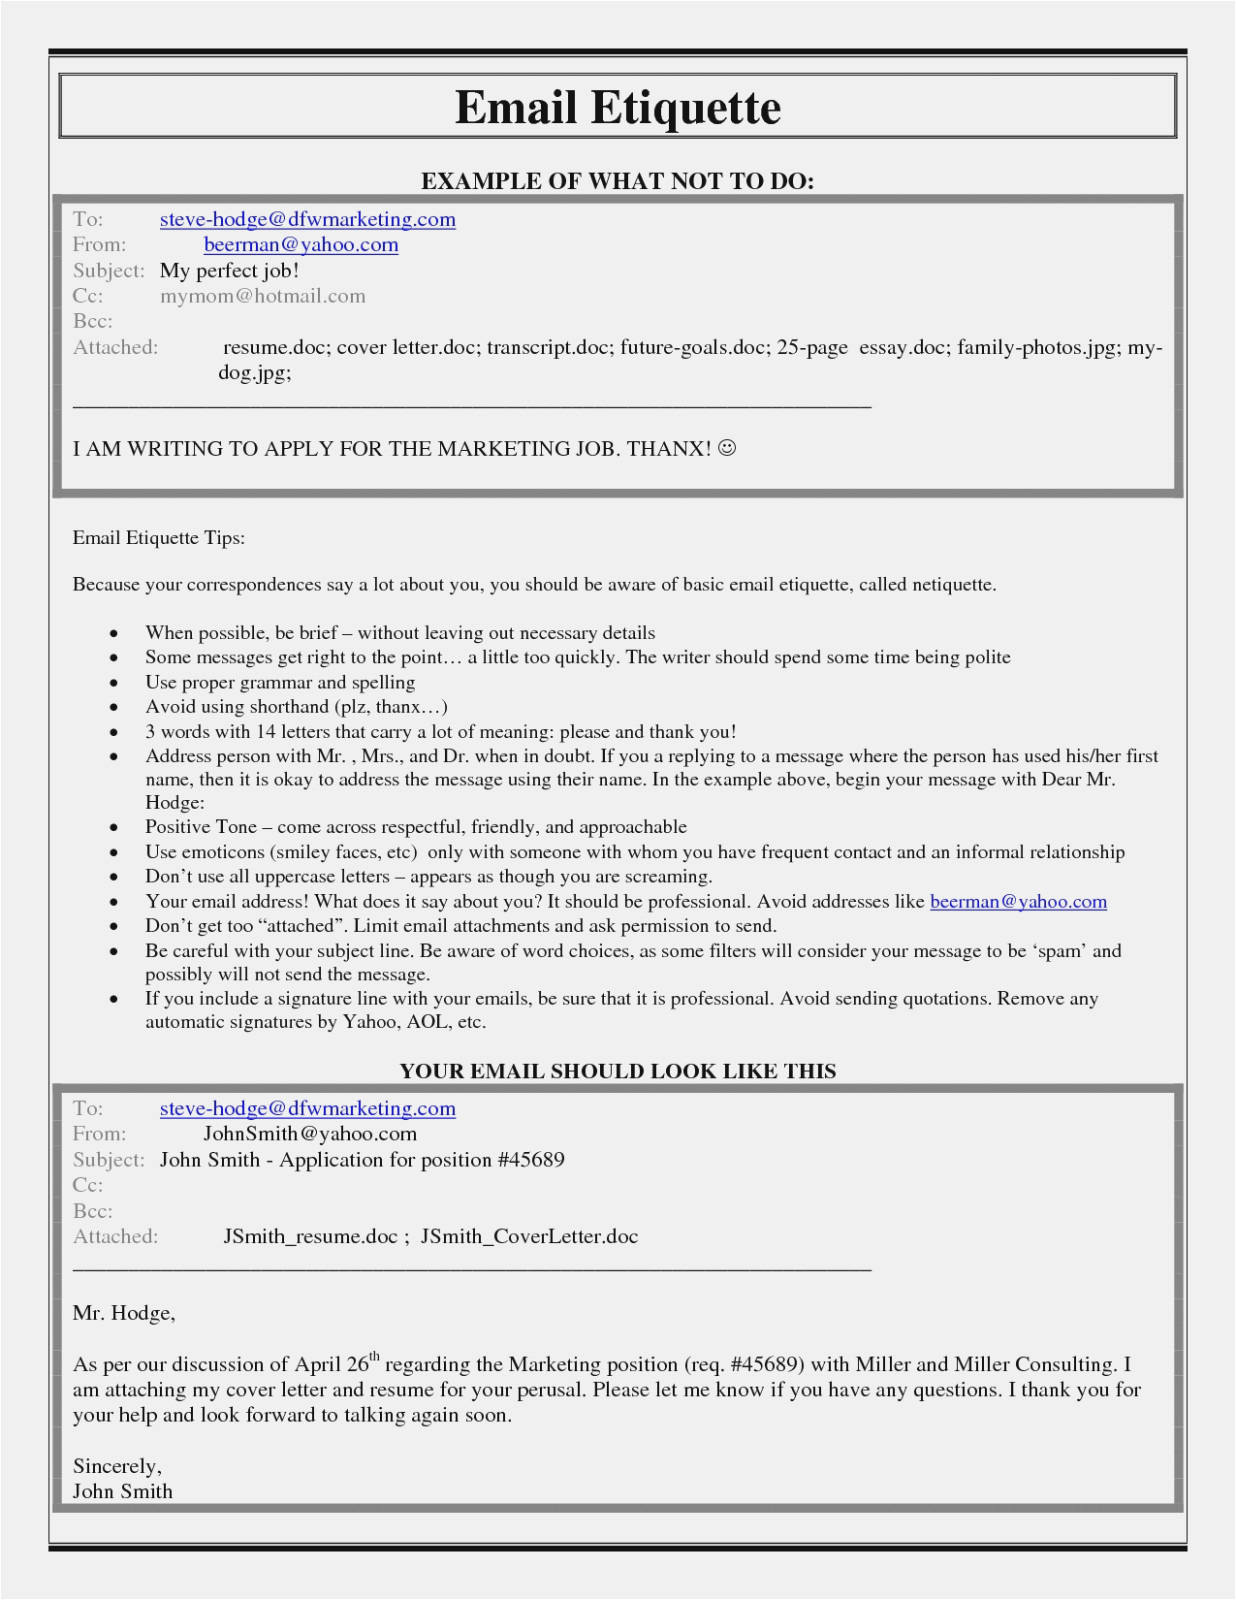 Sample Of Sending Resume Through Email 14 Ways How to Get the Most From This Sending Resume